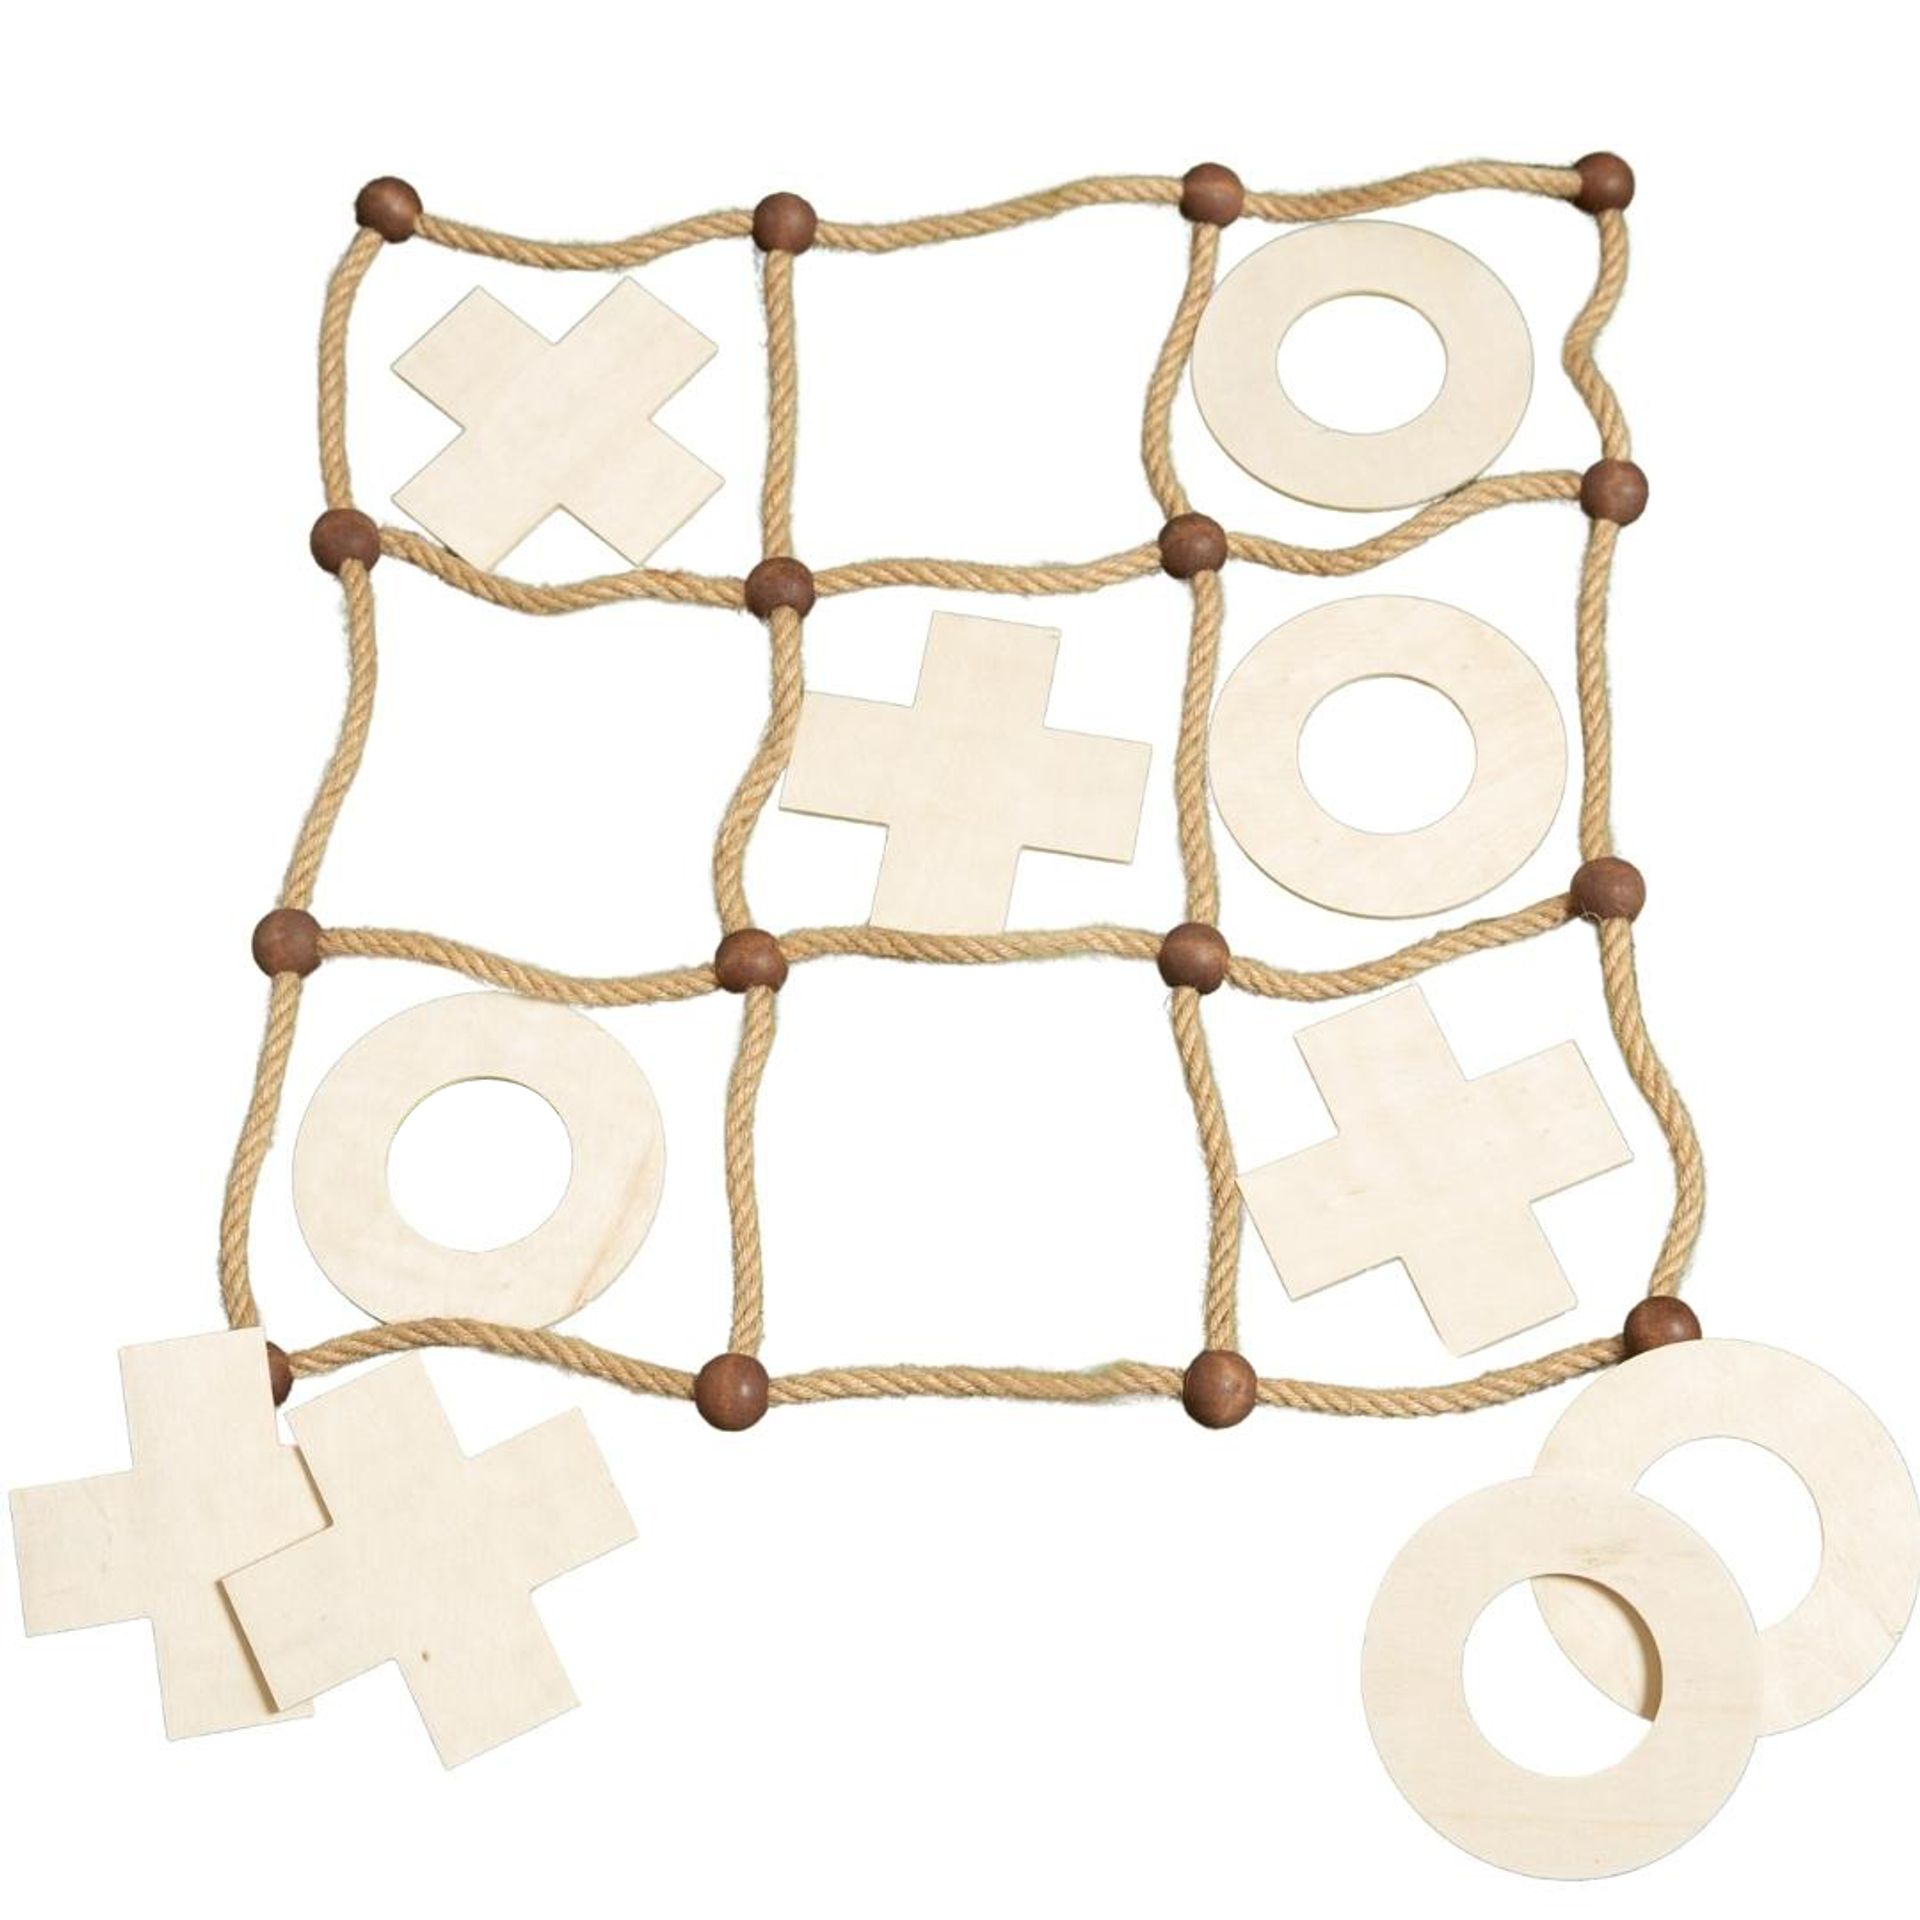 &Quirky Outdoor Tic Tac Toe Game